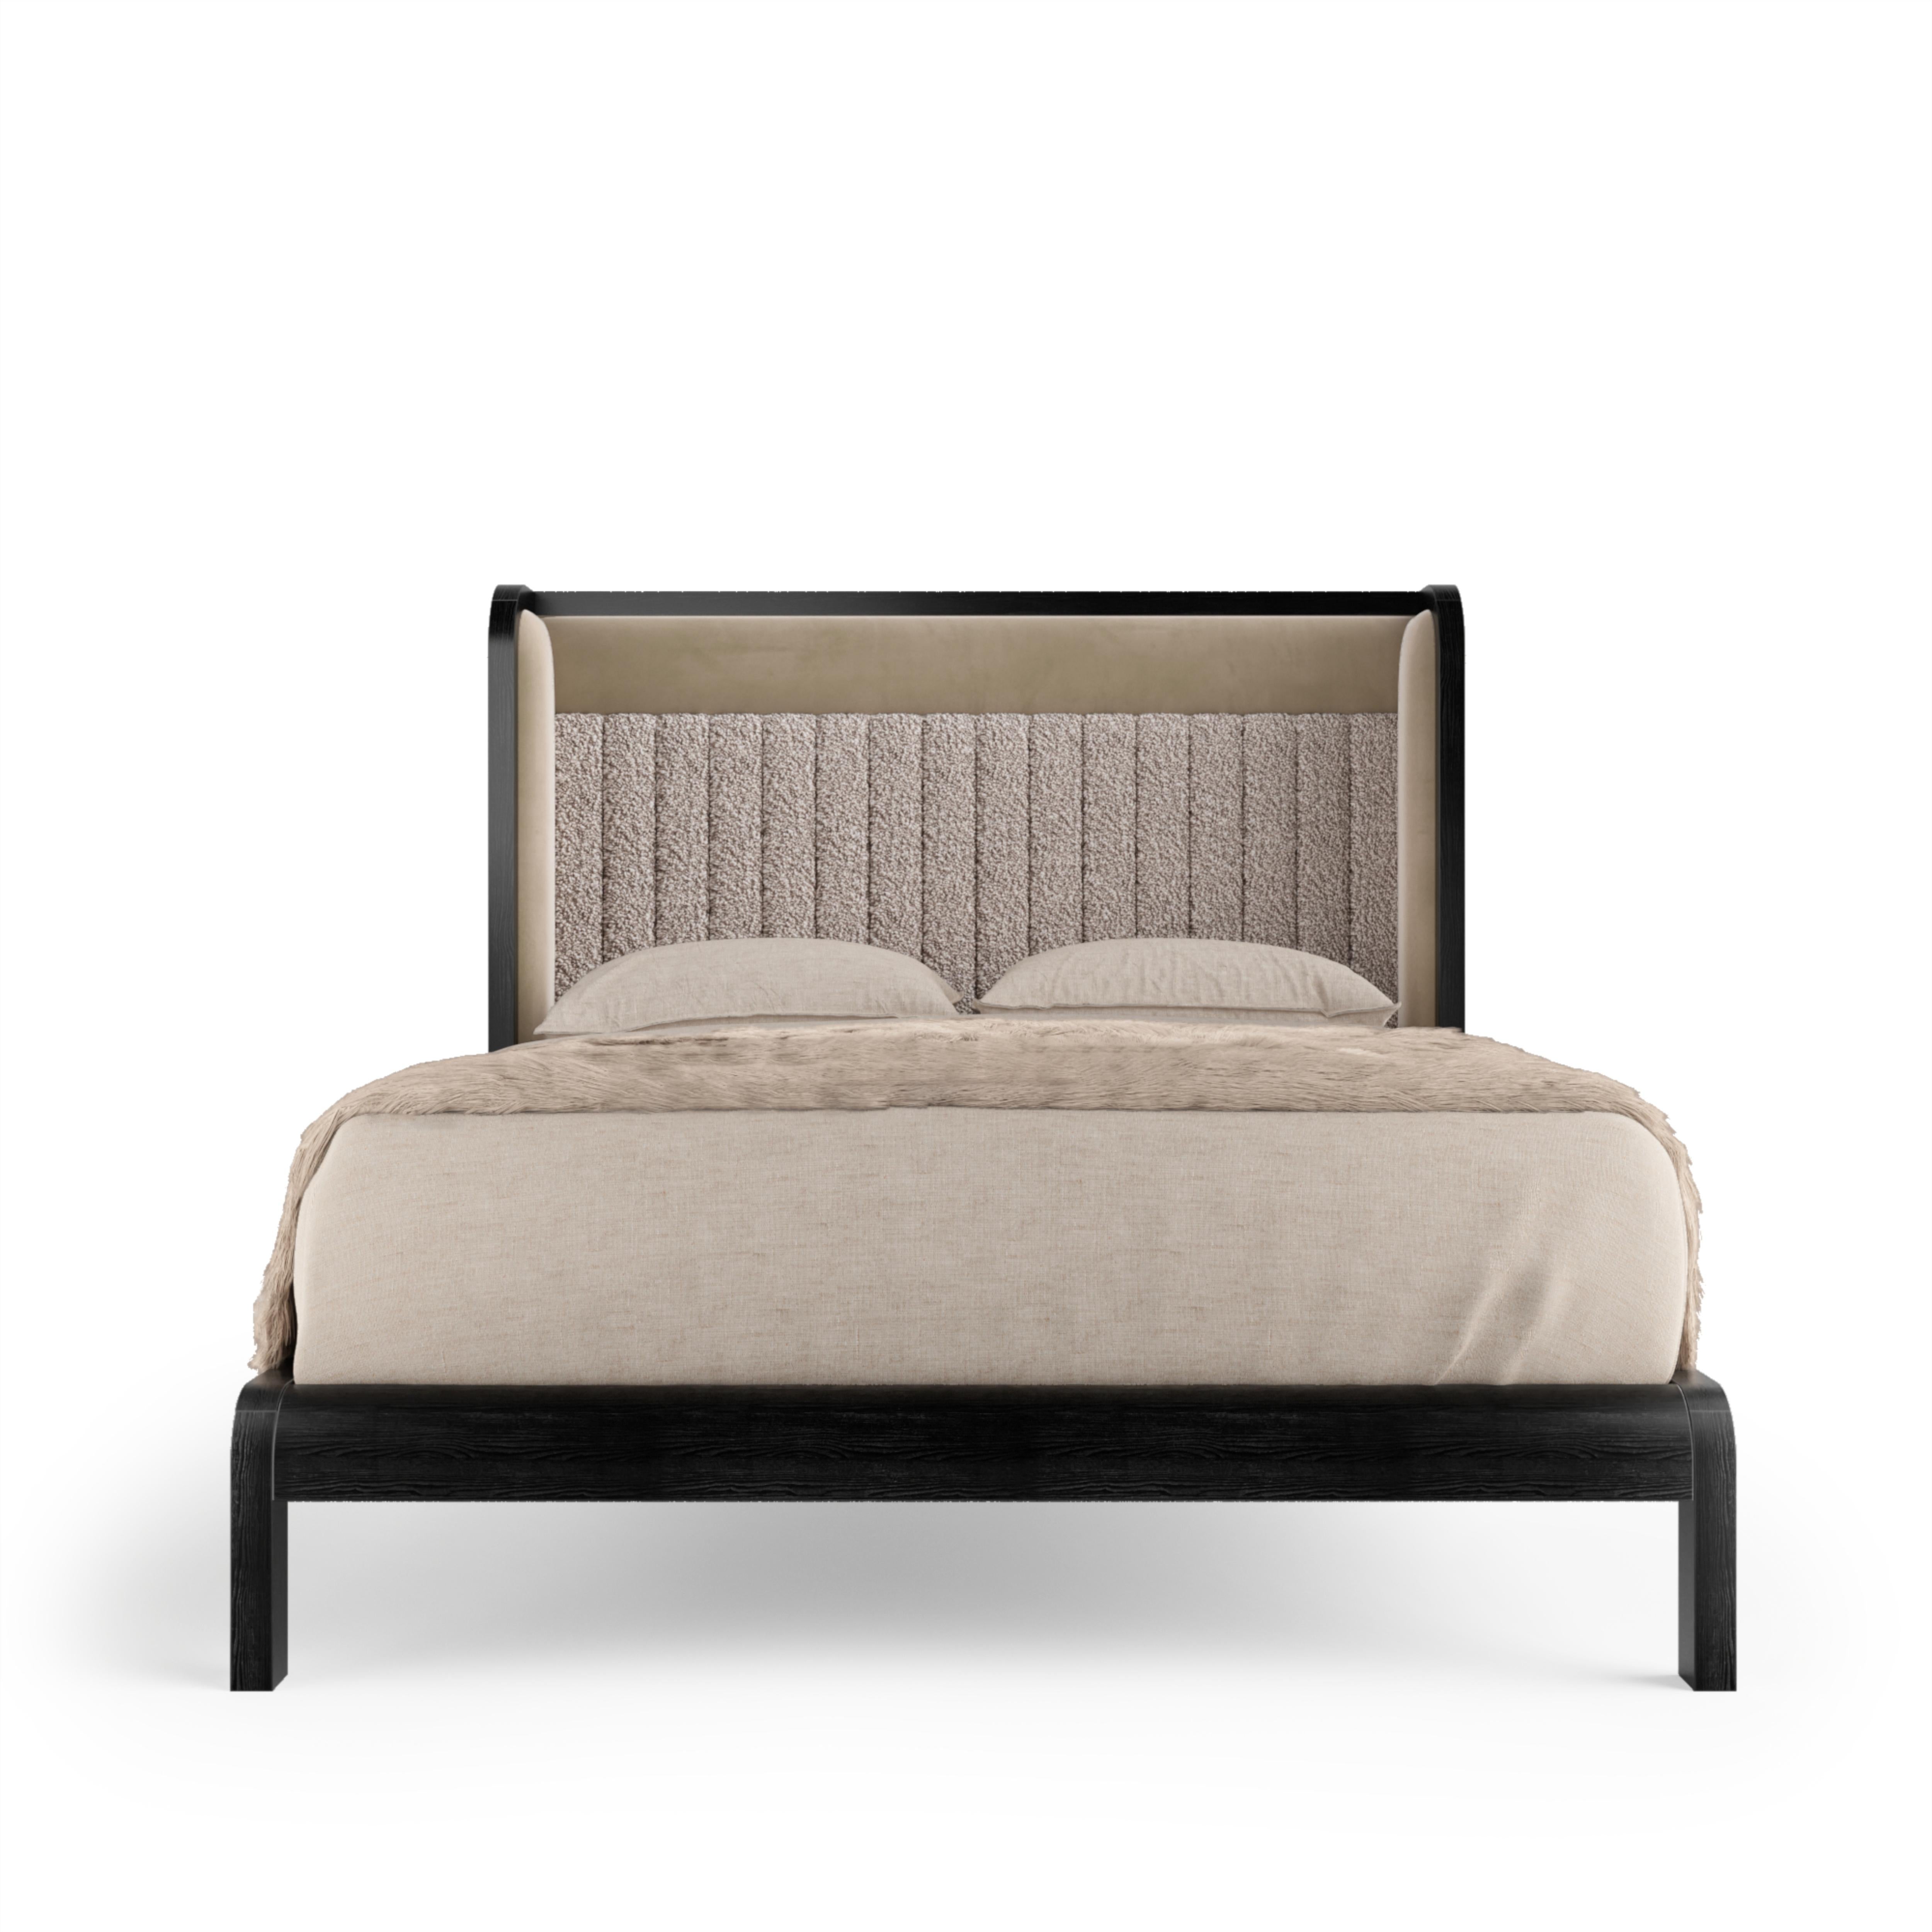 You can now experience the sophistication and sensuality of Casa Botelho's signature design with the New Cupid Bed II, which is available in both UK and American sizes. Casa Botelho's signature sophistication and sensuous design can be yours with